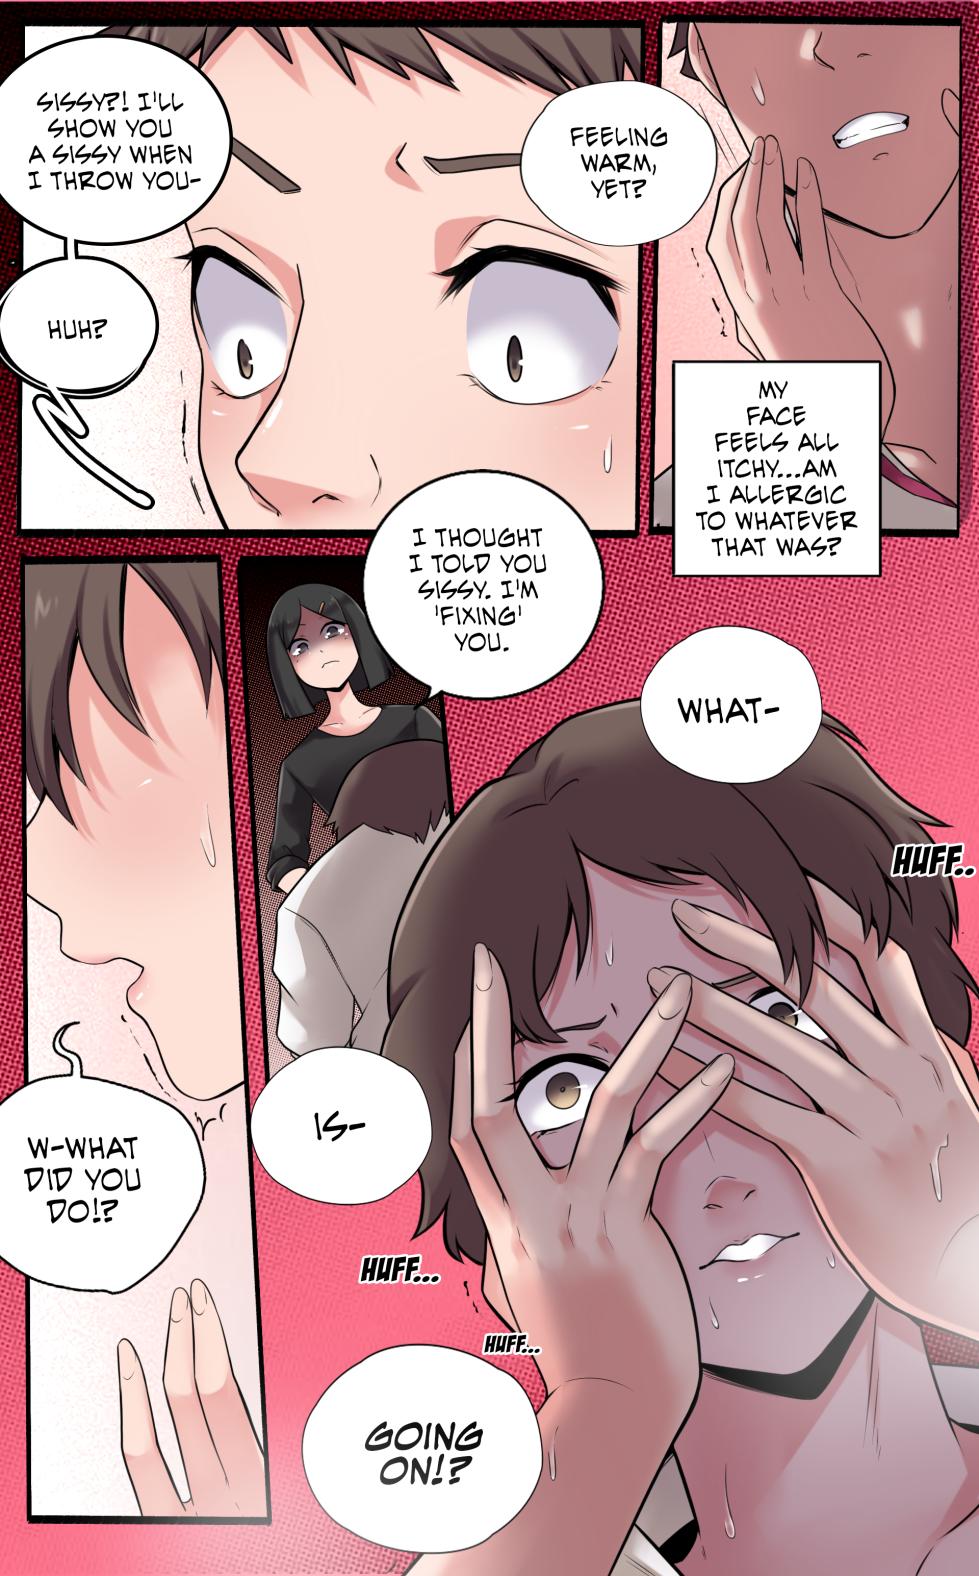 [MeowWithMe] Girlfriend Revenge [Ongoing] - Page 6